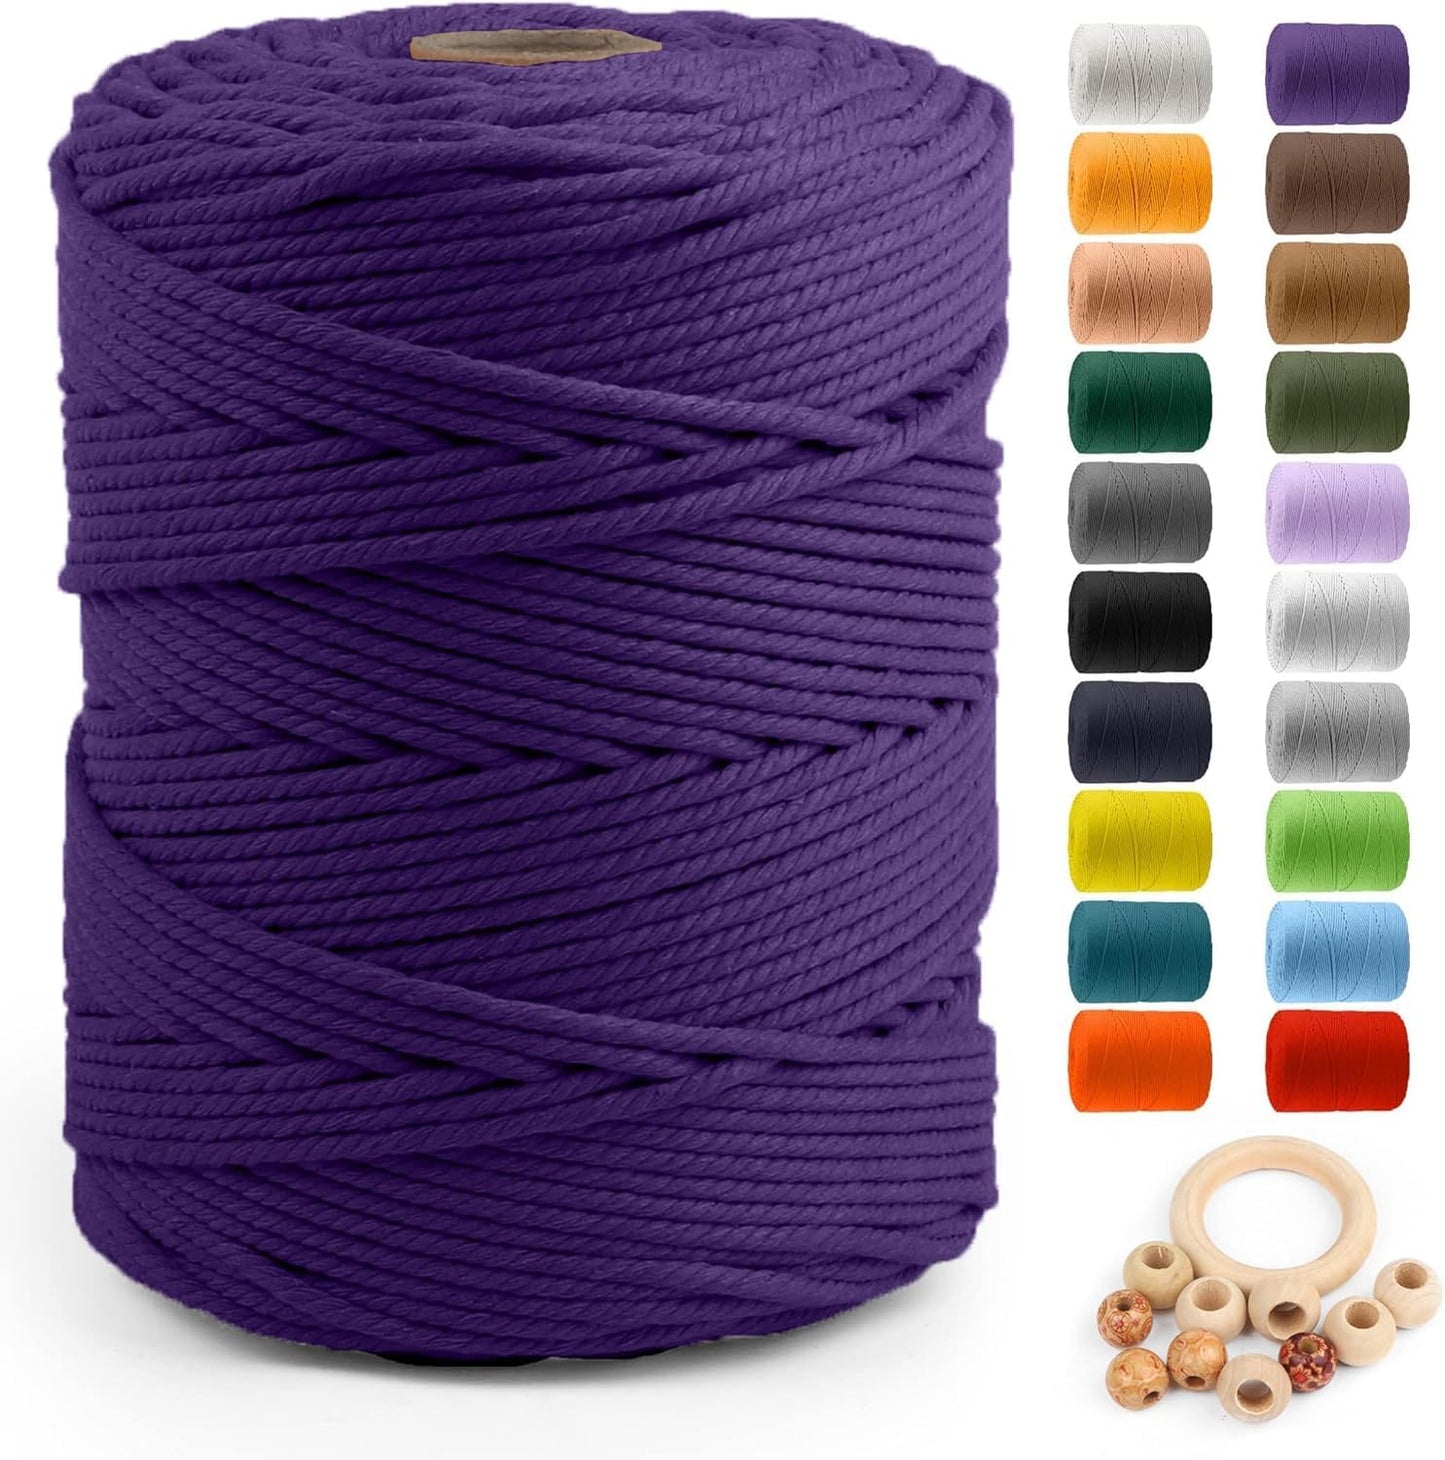 Macrame Cotton Cord 5Mm X 109 Yards,  100% Natural Handmade Colorful 4 Strands Twisted Braided Cotton Rope for Wall Hanging Plant Hangers Gift Wrapping Tapestry DIY Crafts(100M,White)